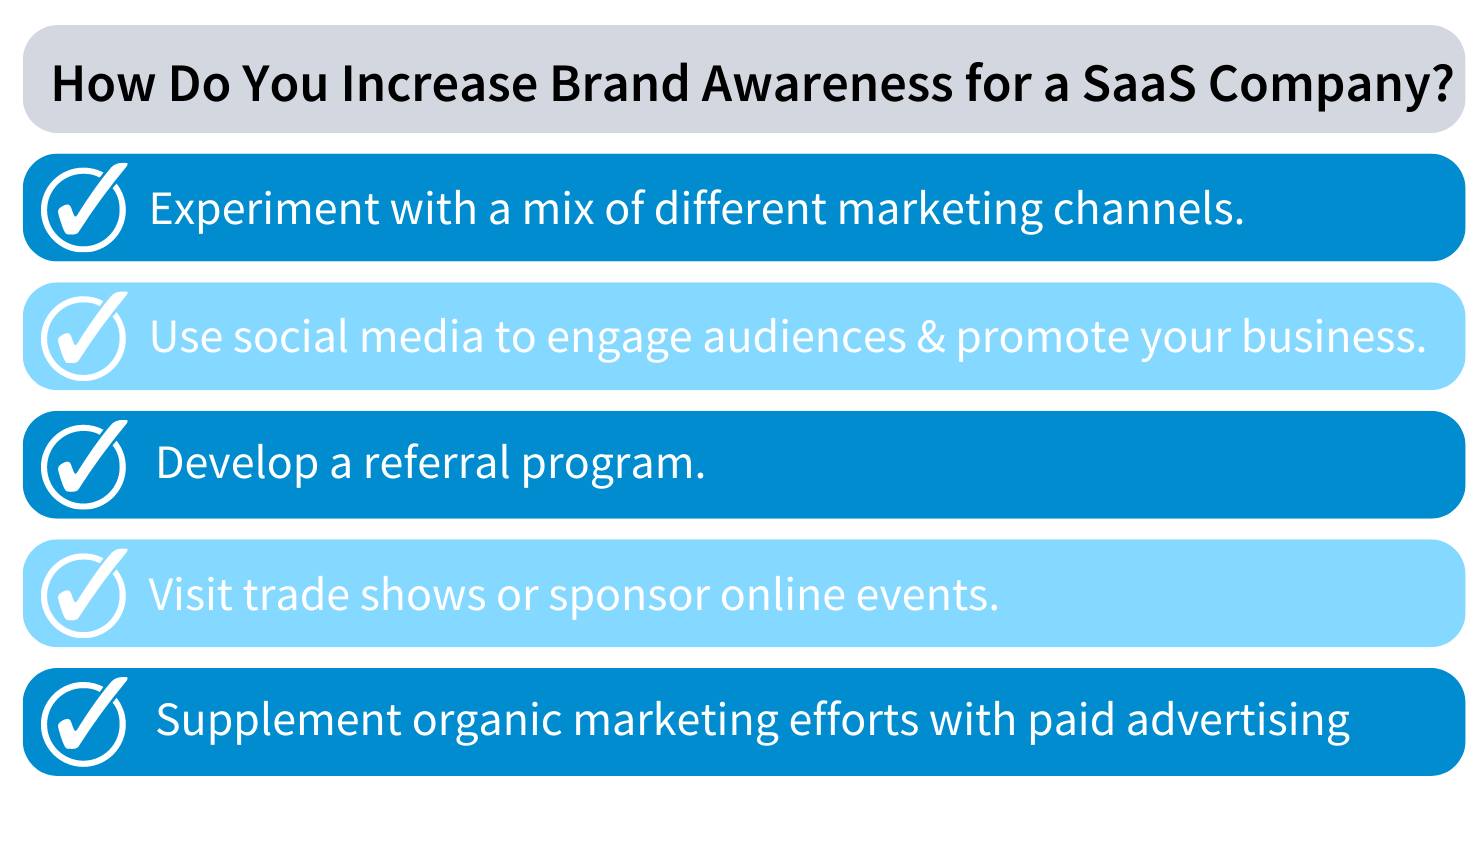 How Do You Increase Brand Awareness for a SaaS Company